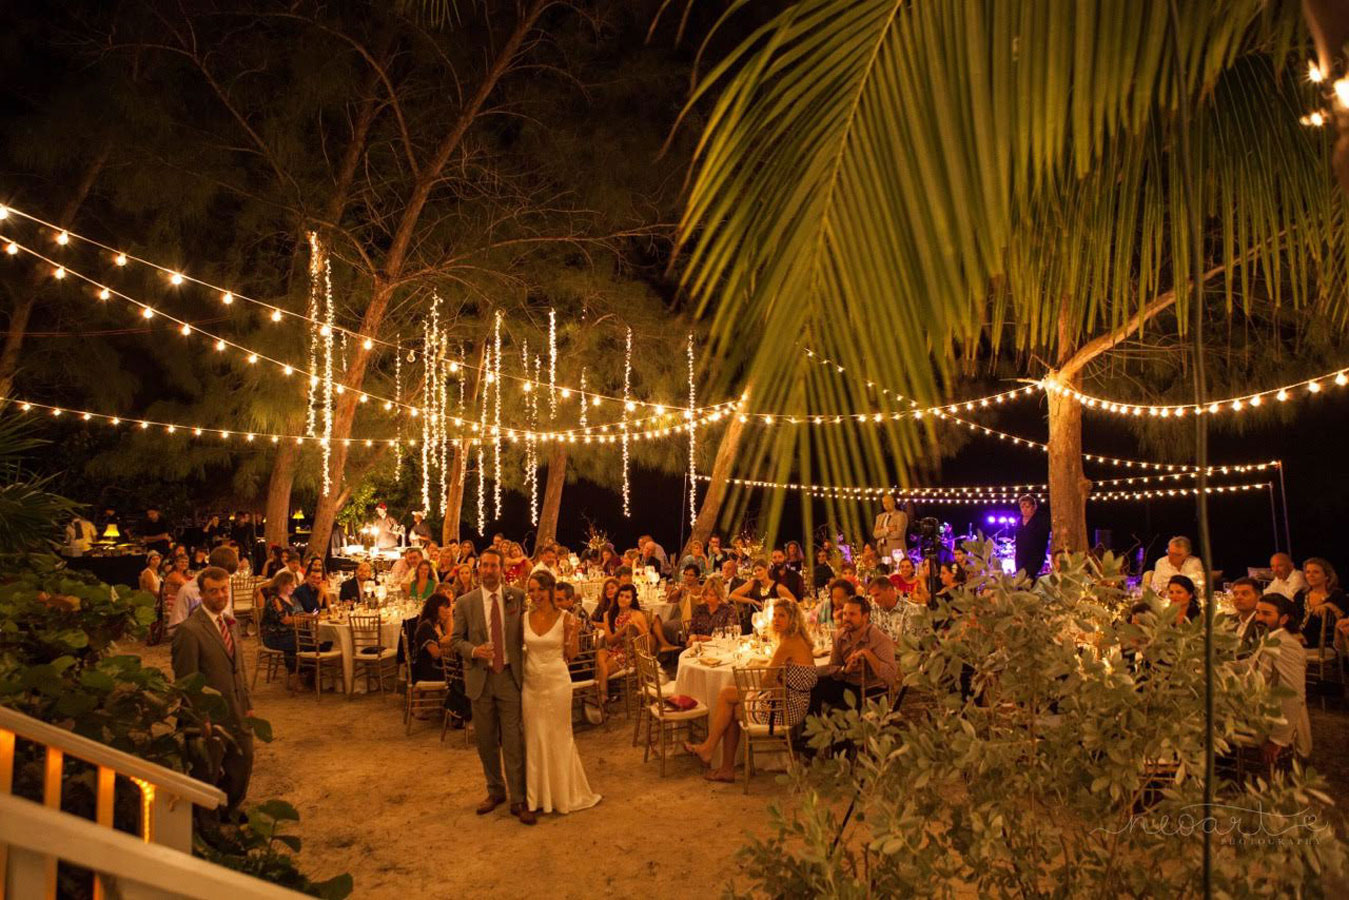 Photo of a wedding reception on a beach at nighttime.